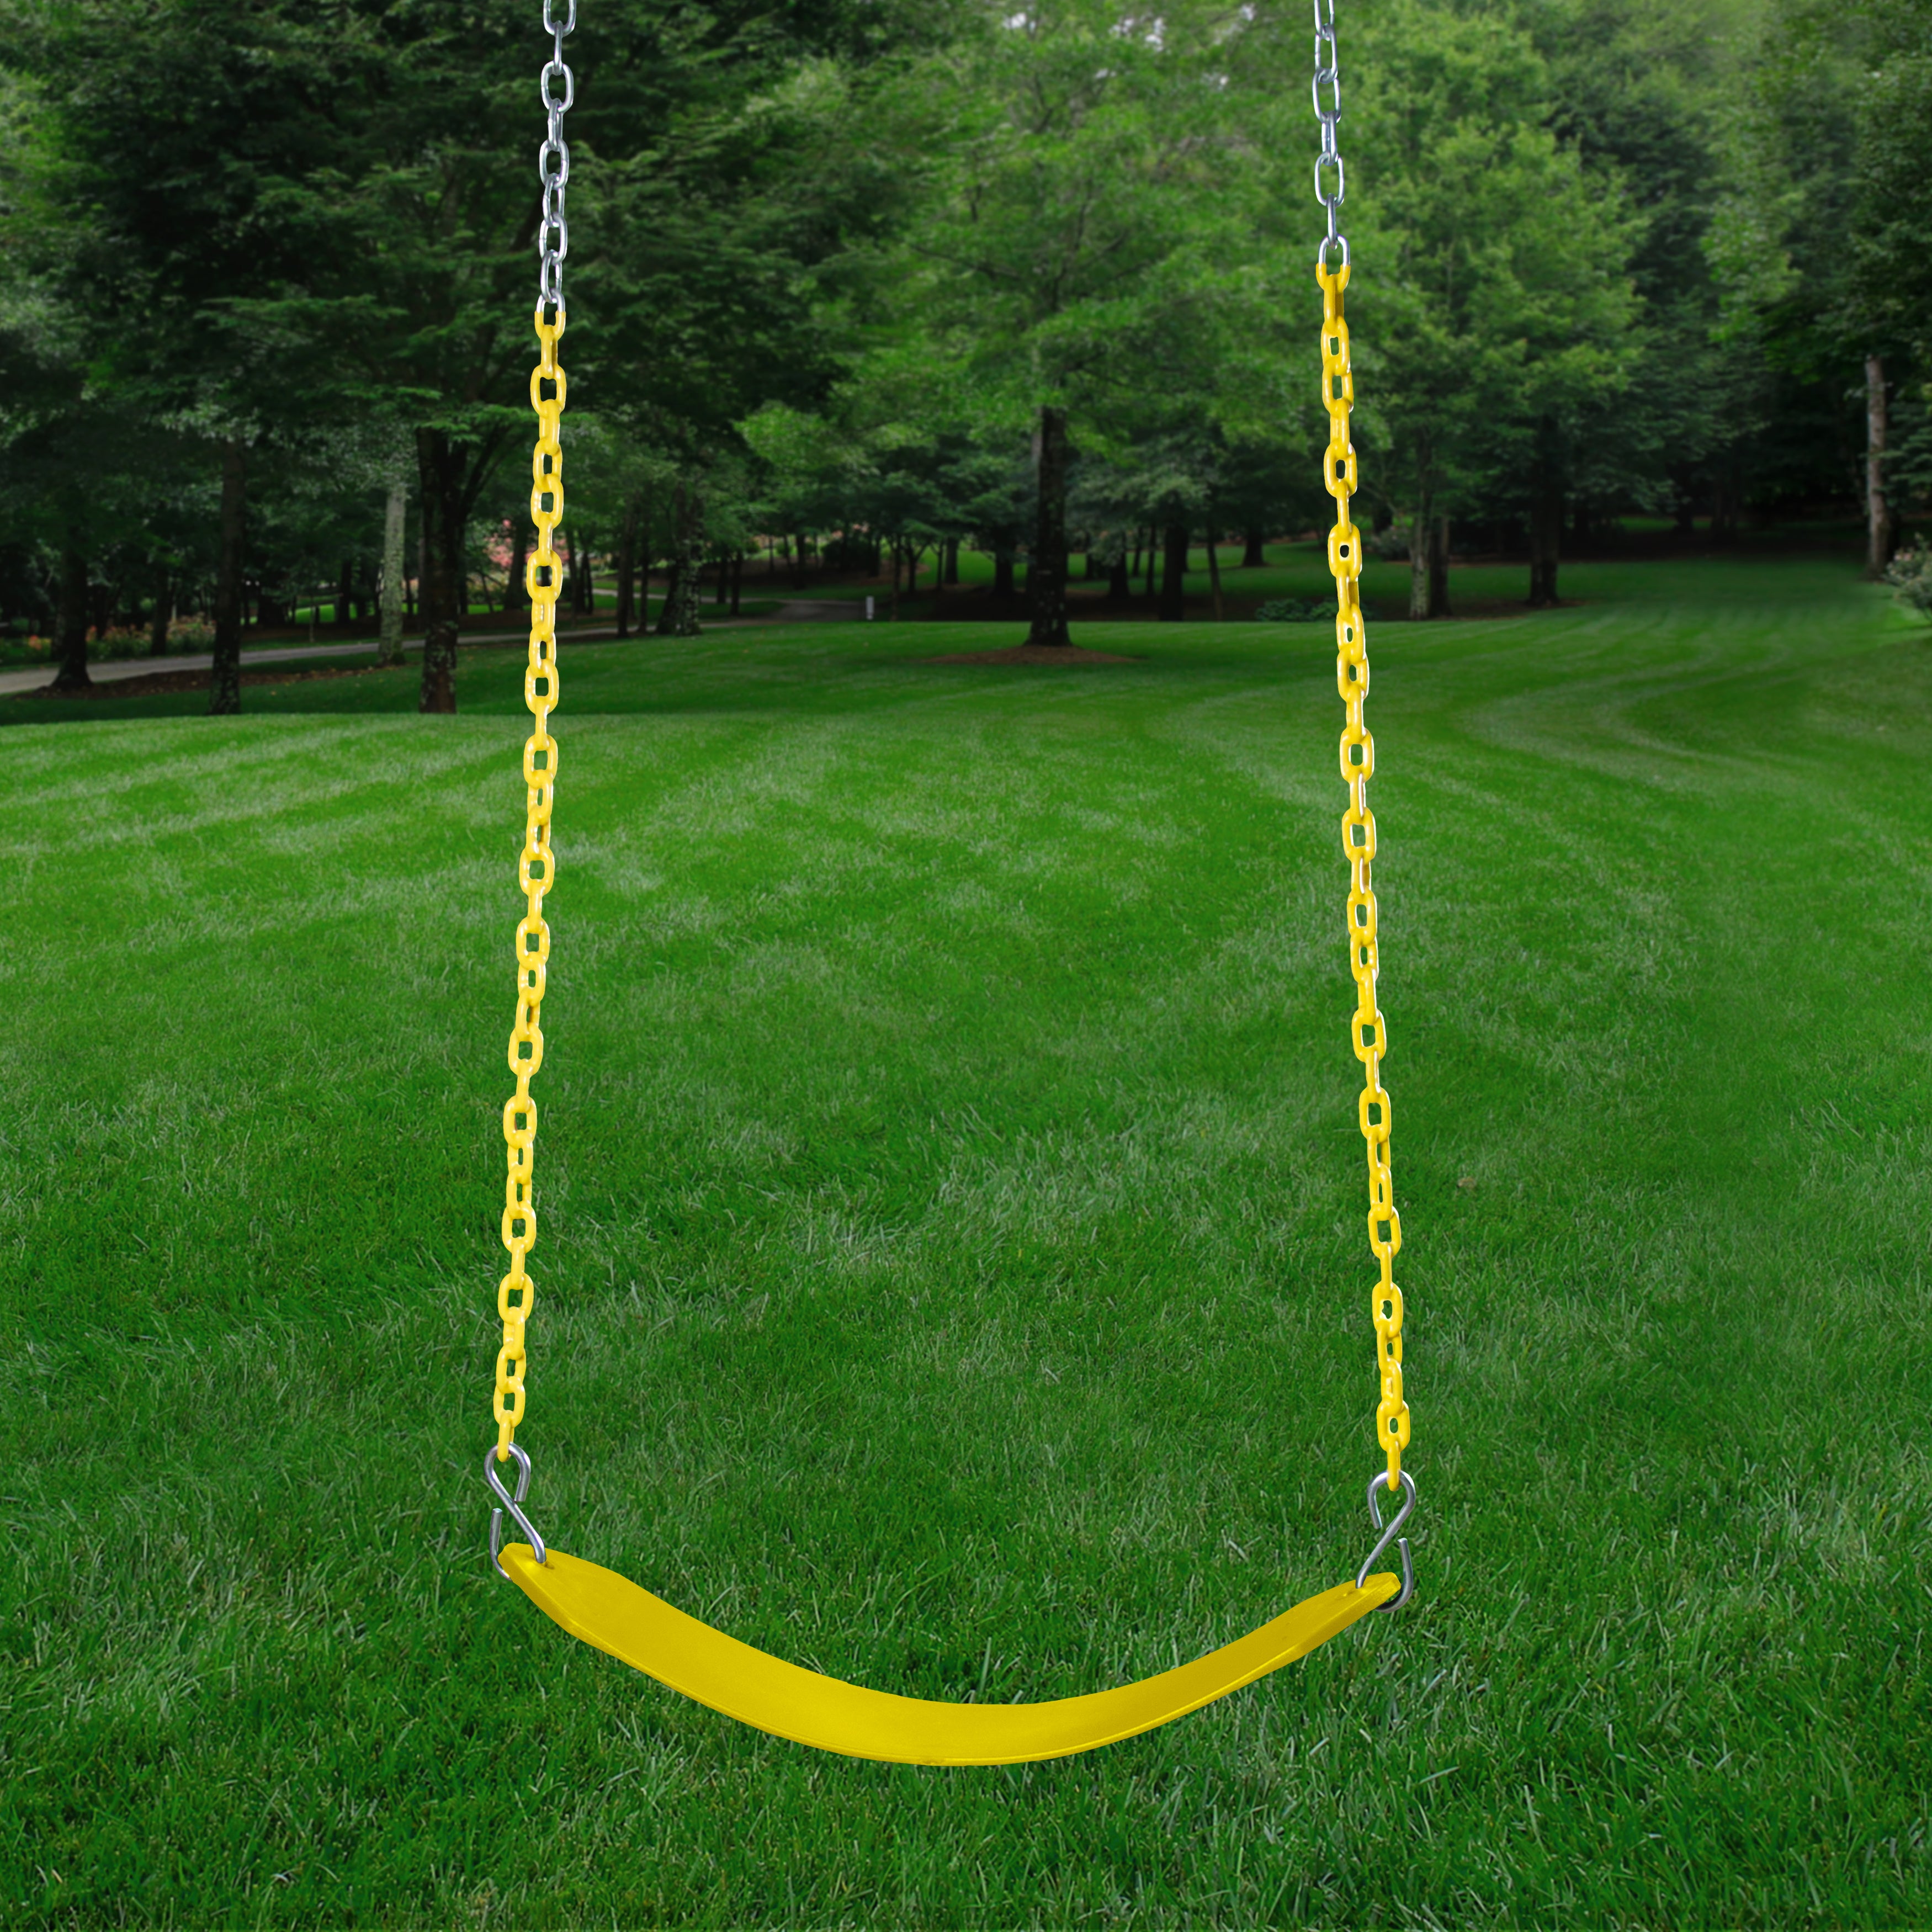 Belt Swing With Coated Chain - Heavy Duty | WillyGoat Playground & Park Equipment